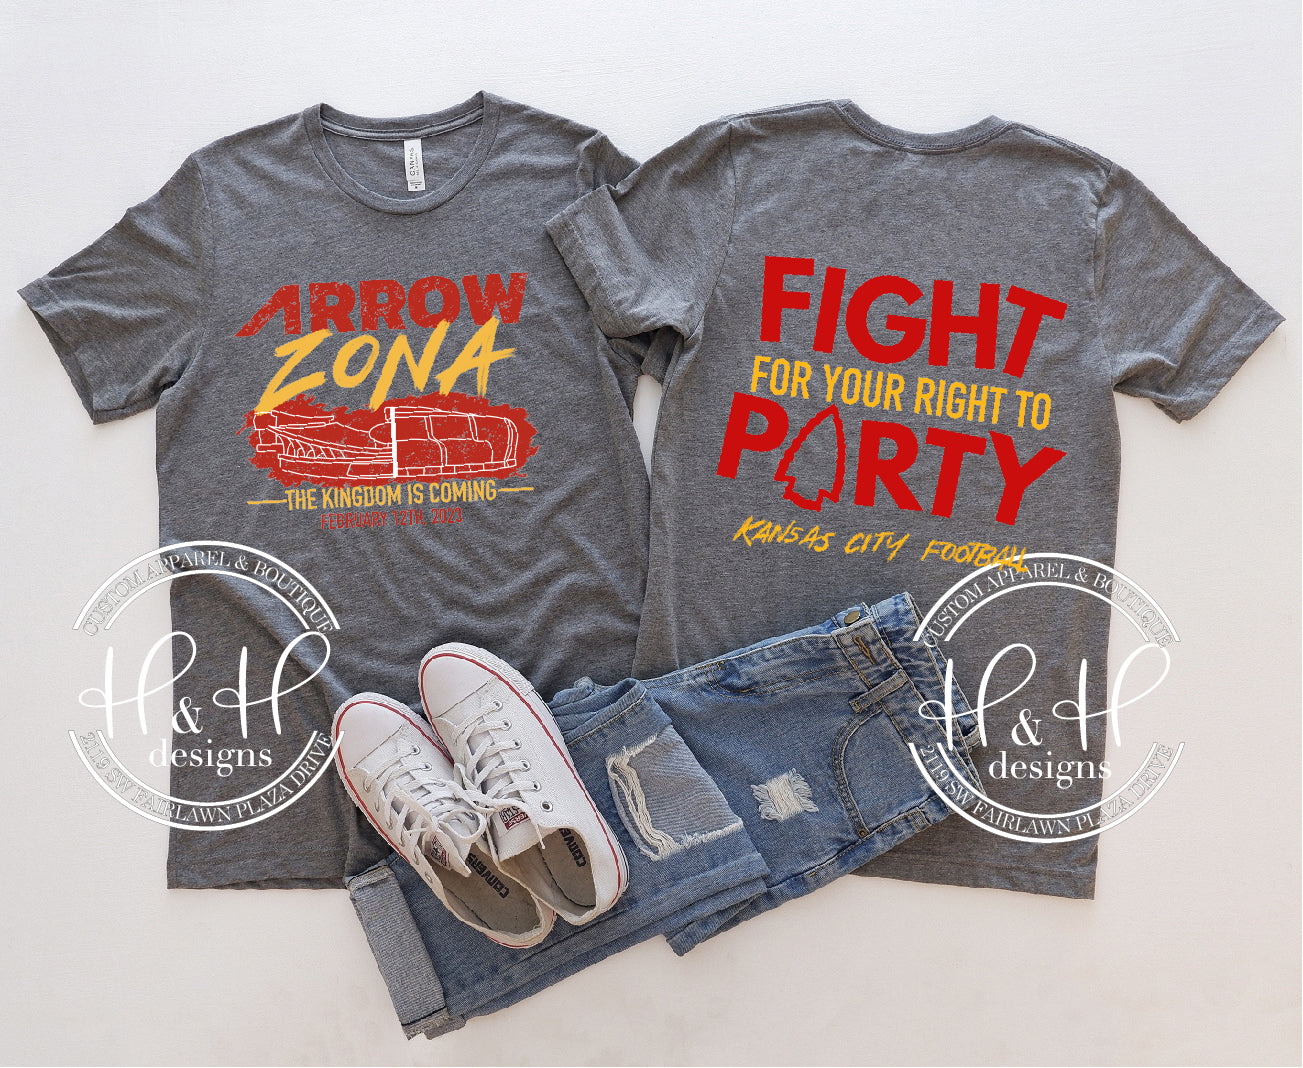 Arrow Zona Front - Fight for your right to Party Back